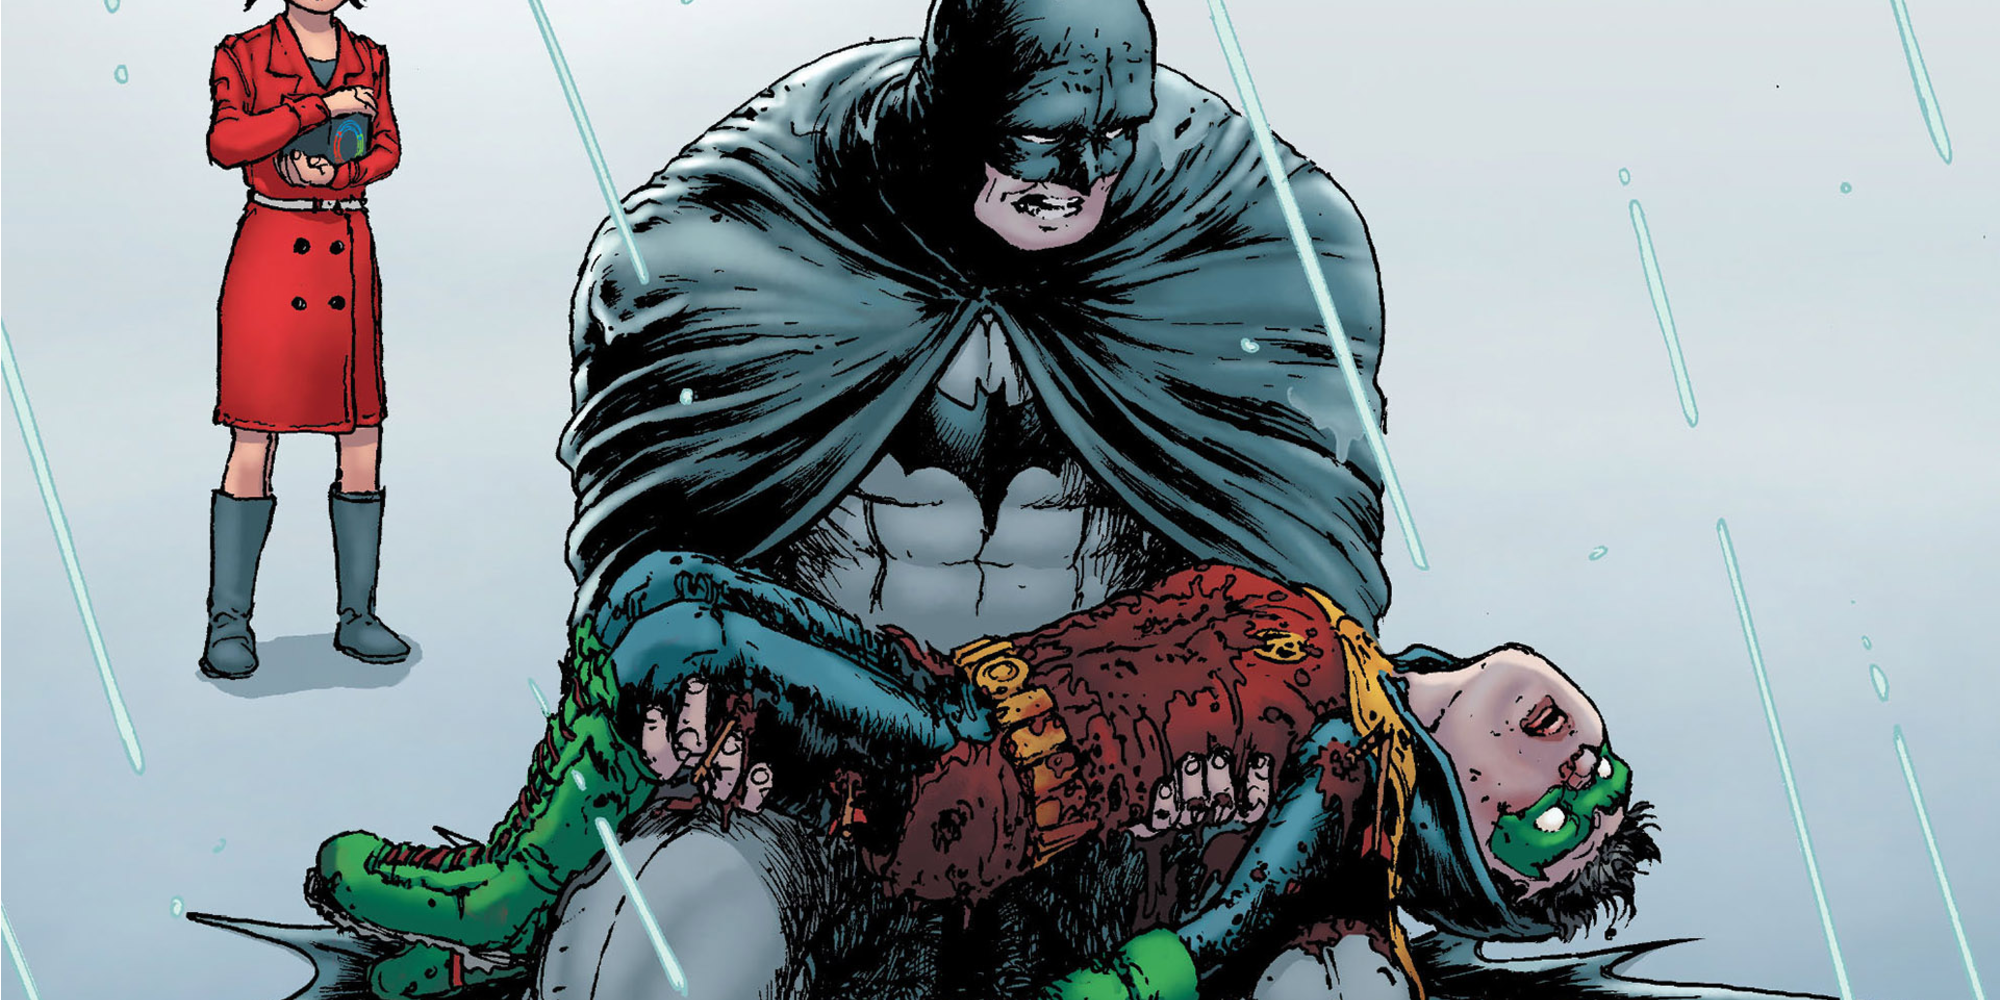 damian wayne in his father's arms, apparently dead